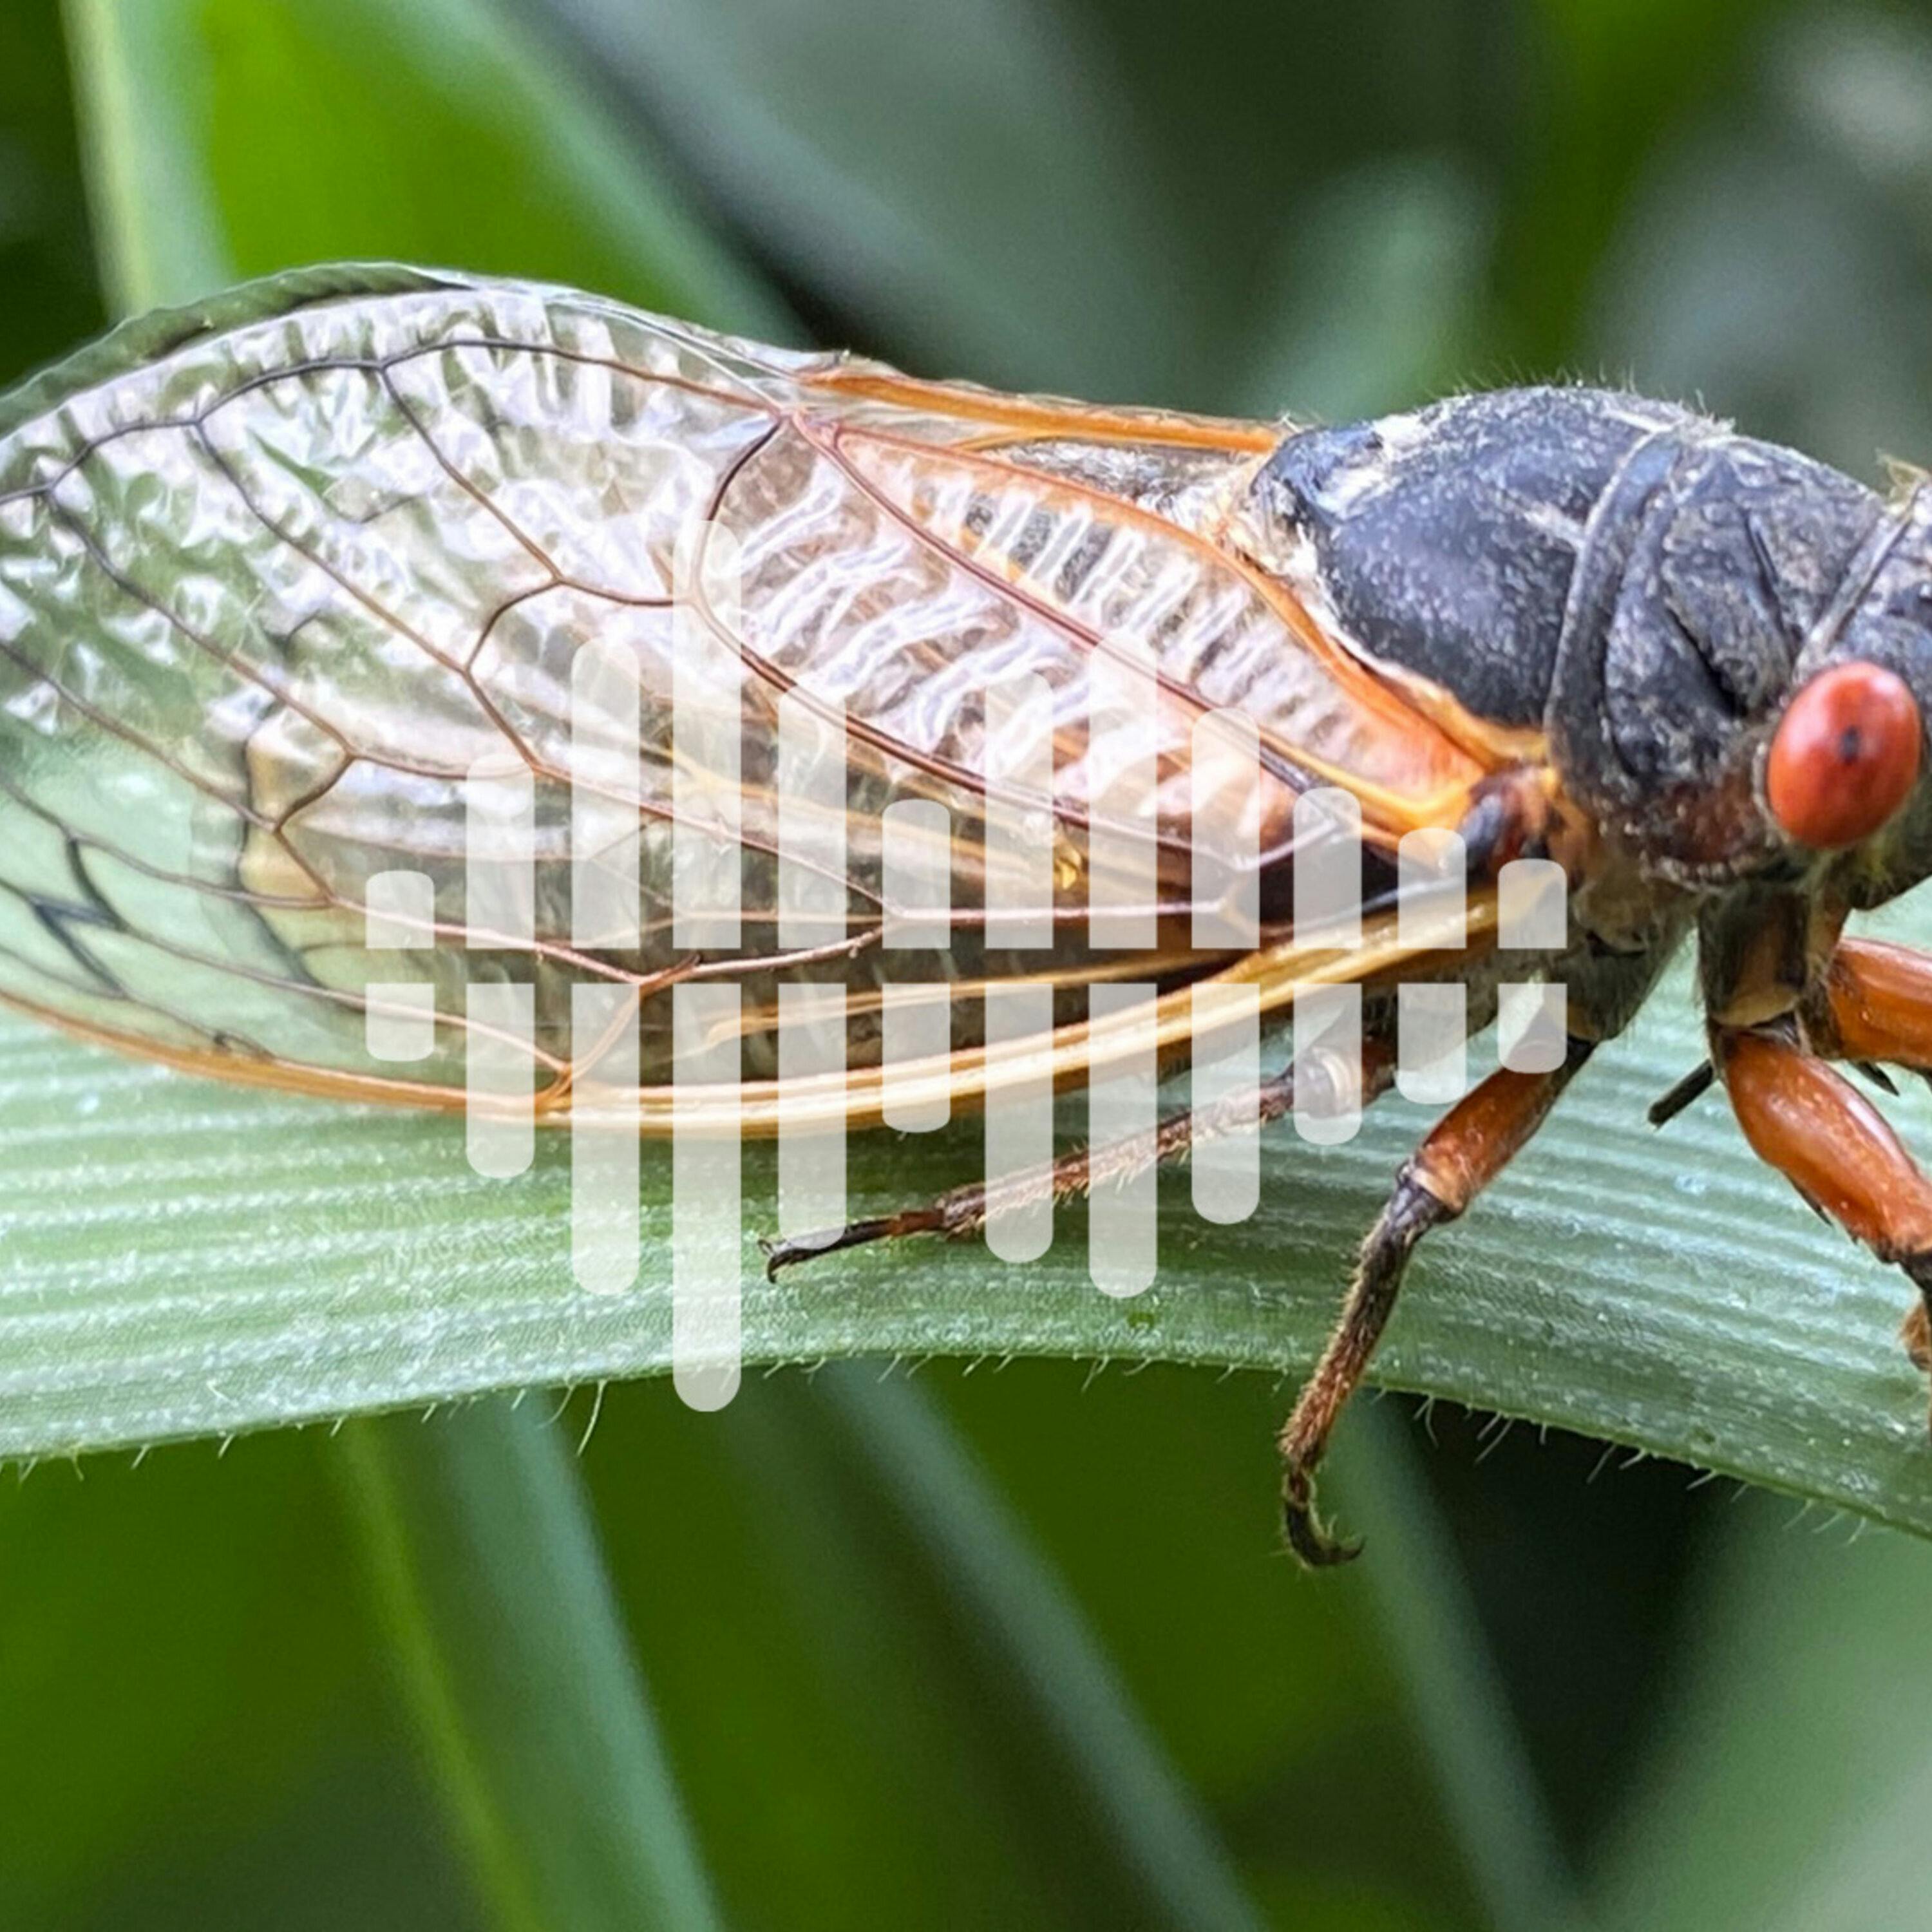 Cicada citizen science, and expanding the genetic code